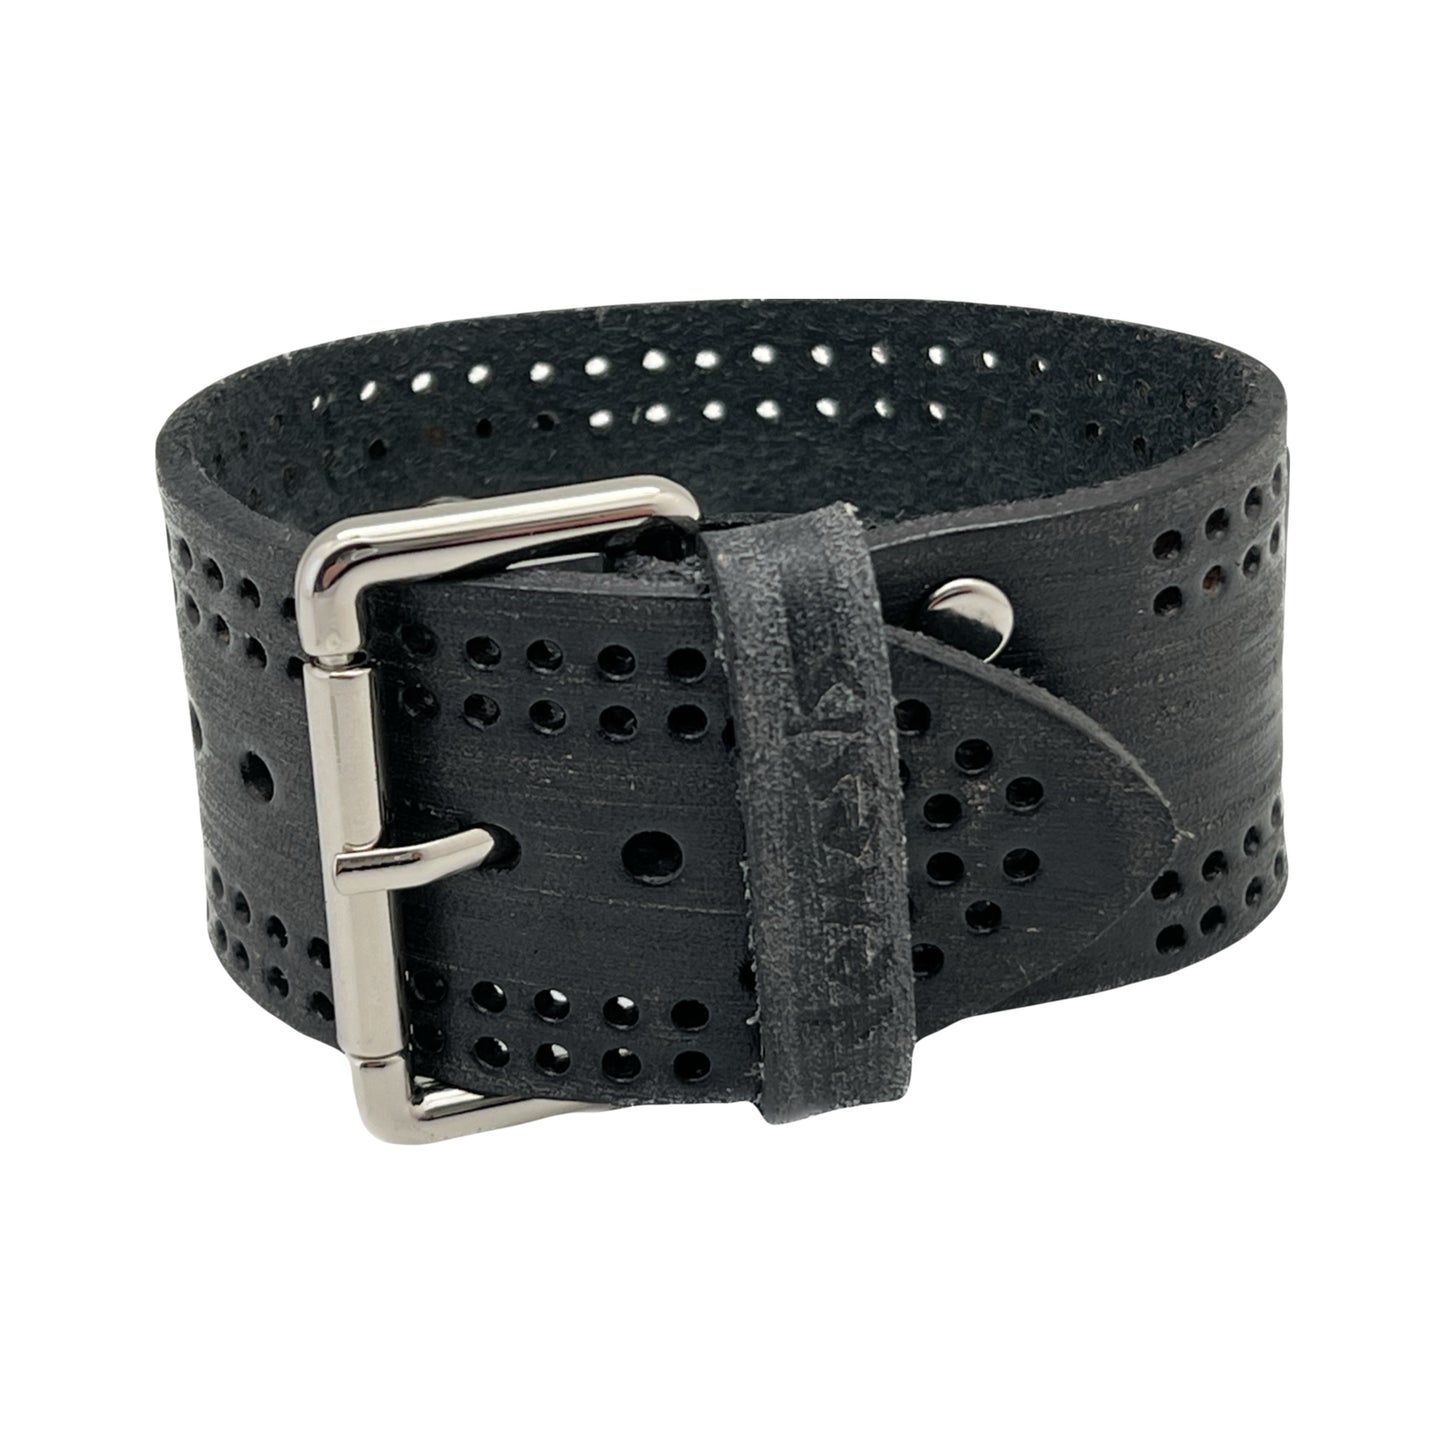 Double Perforated Black Leather Cuff